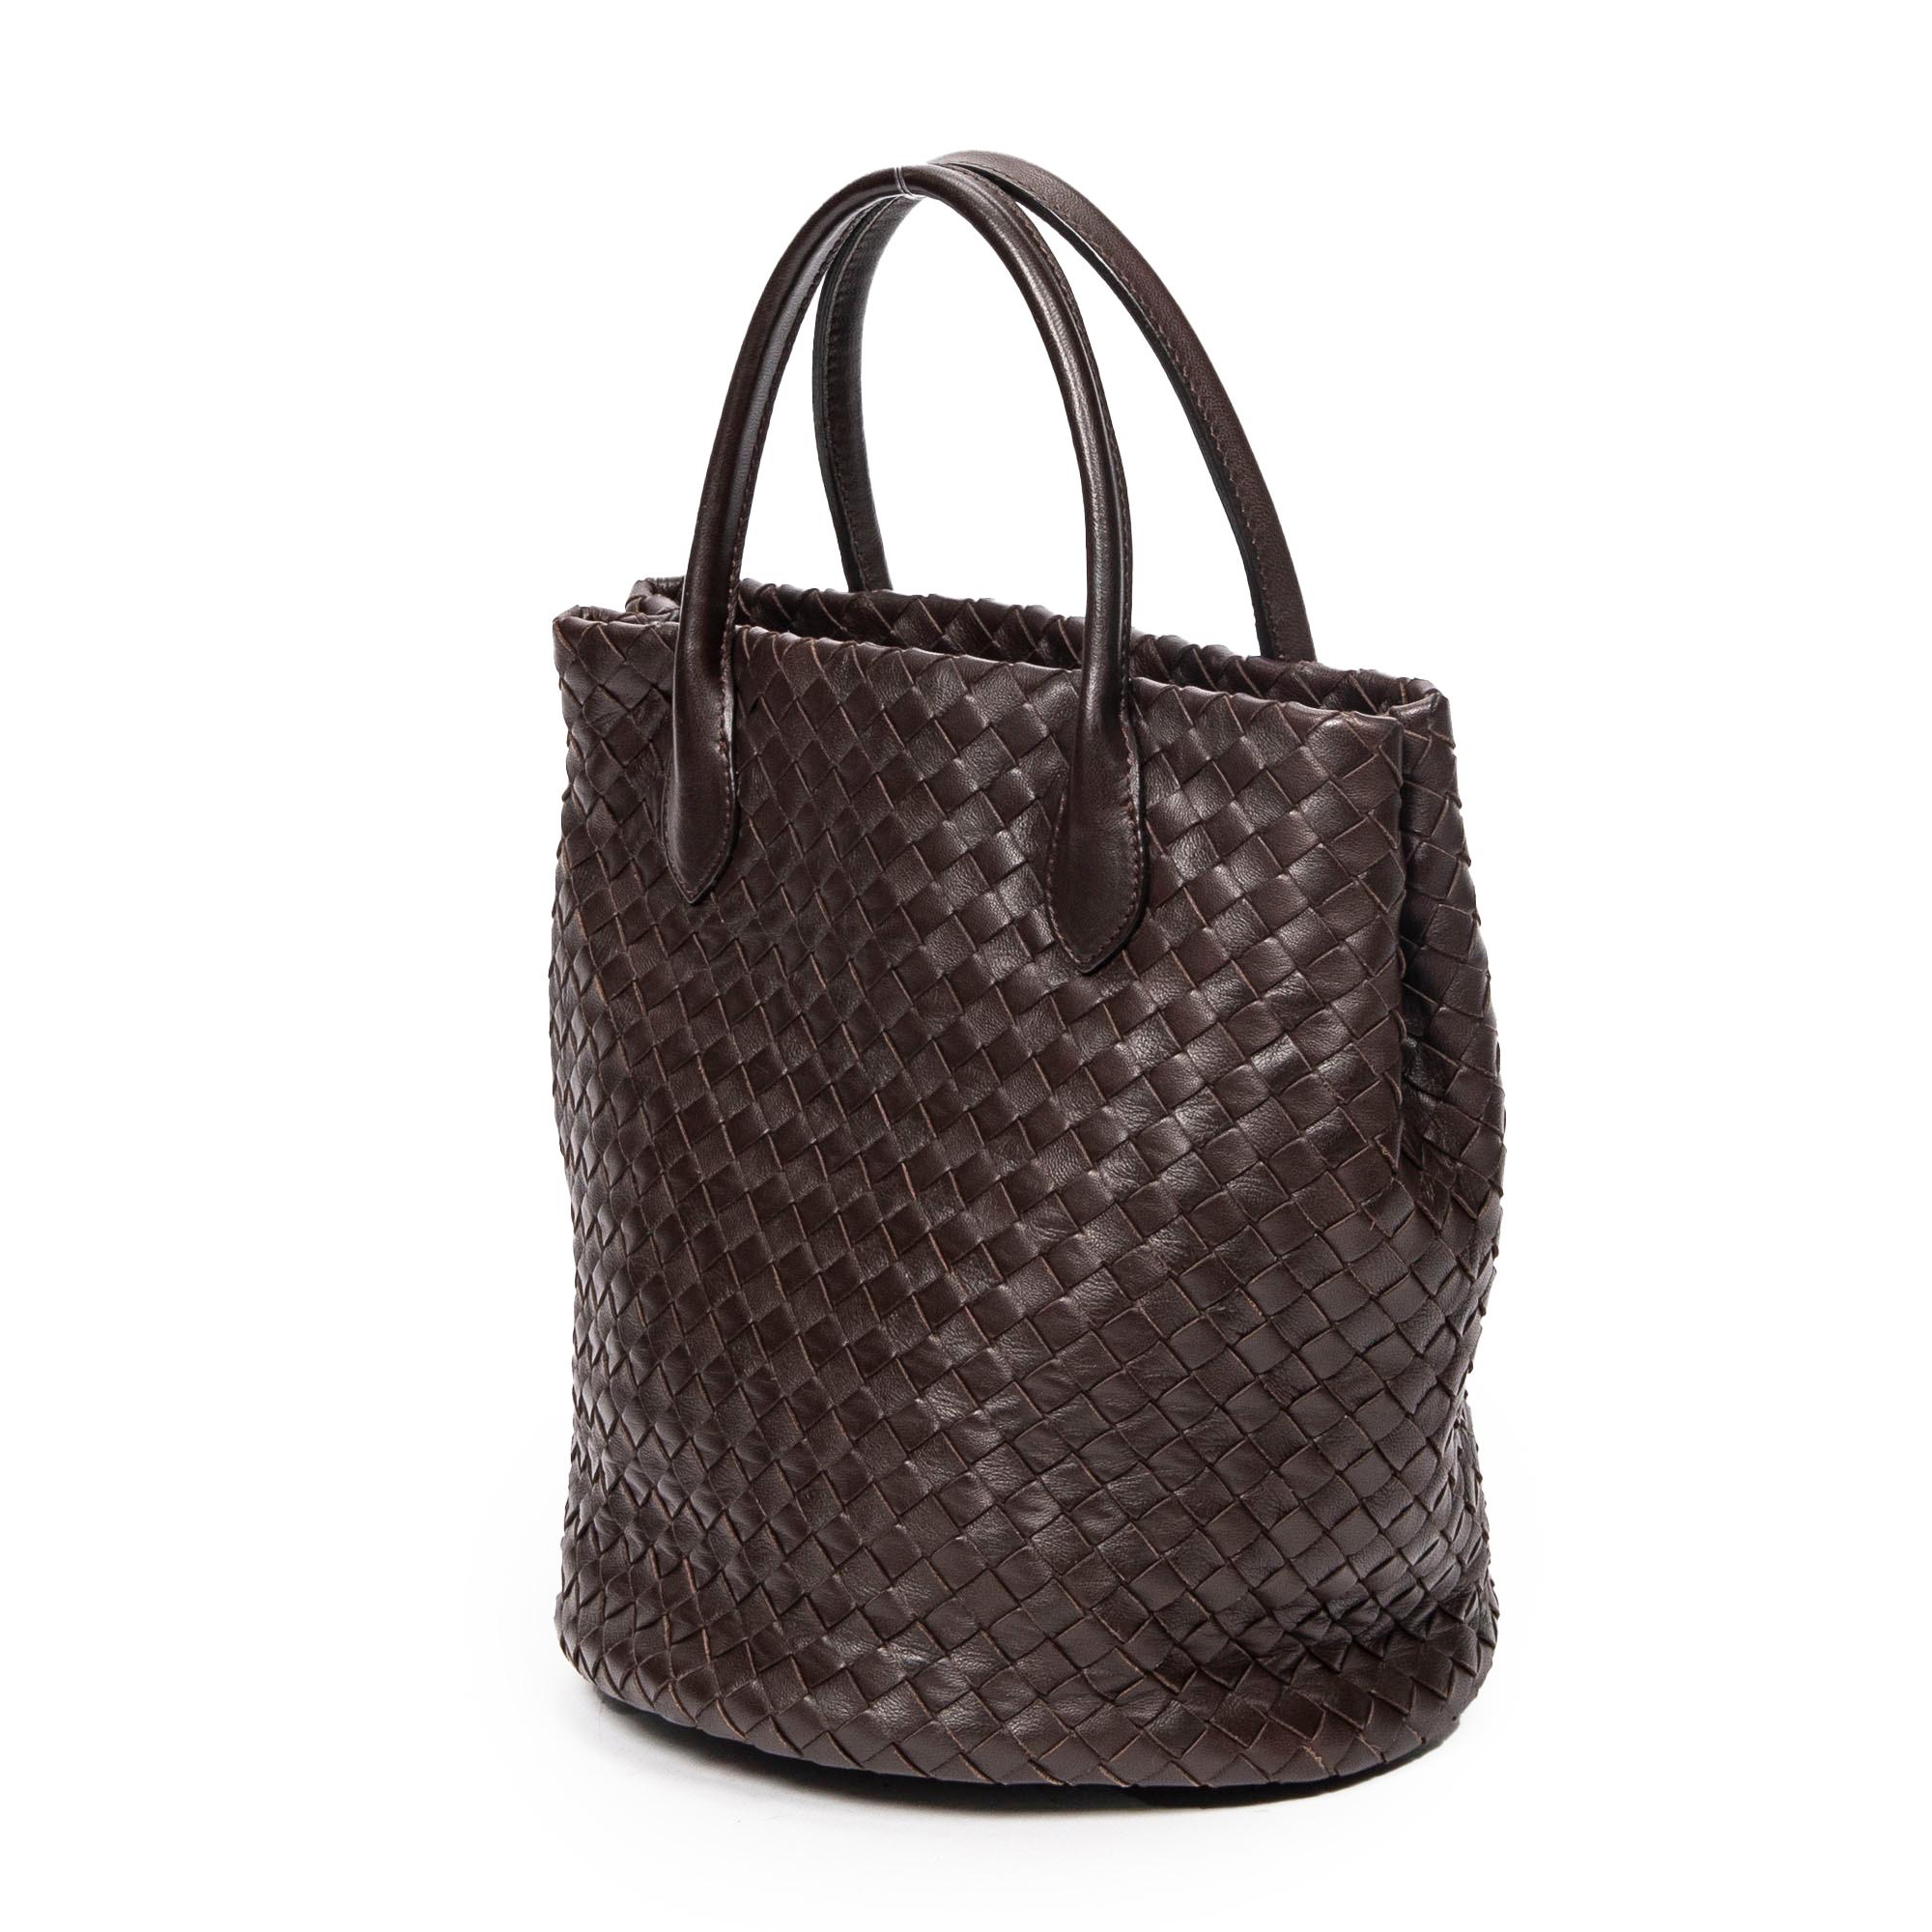 Rich dark brown calfskin leather shapes Bottega Veneta's Chocolate Intrecciato Top Handle Bag, complemented by gold hardware, an open top, and a suede dual-pocket interior.

SPECIFICS
• Length: 8.7